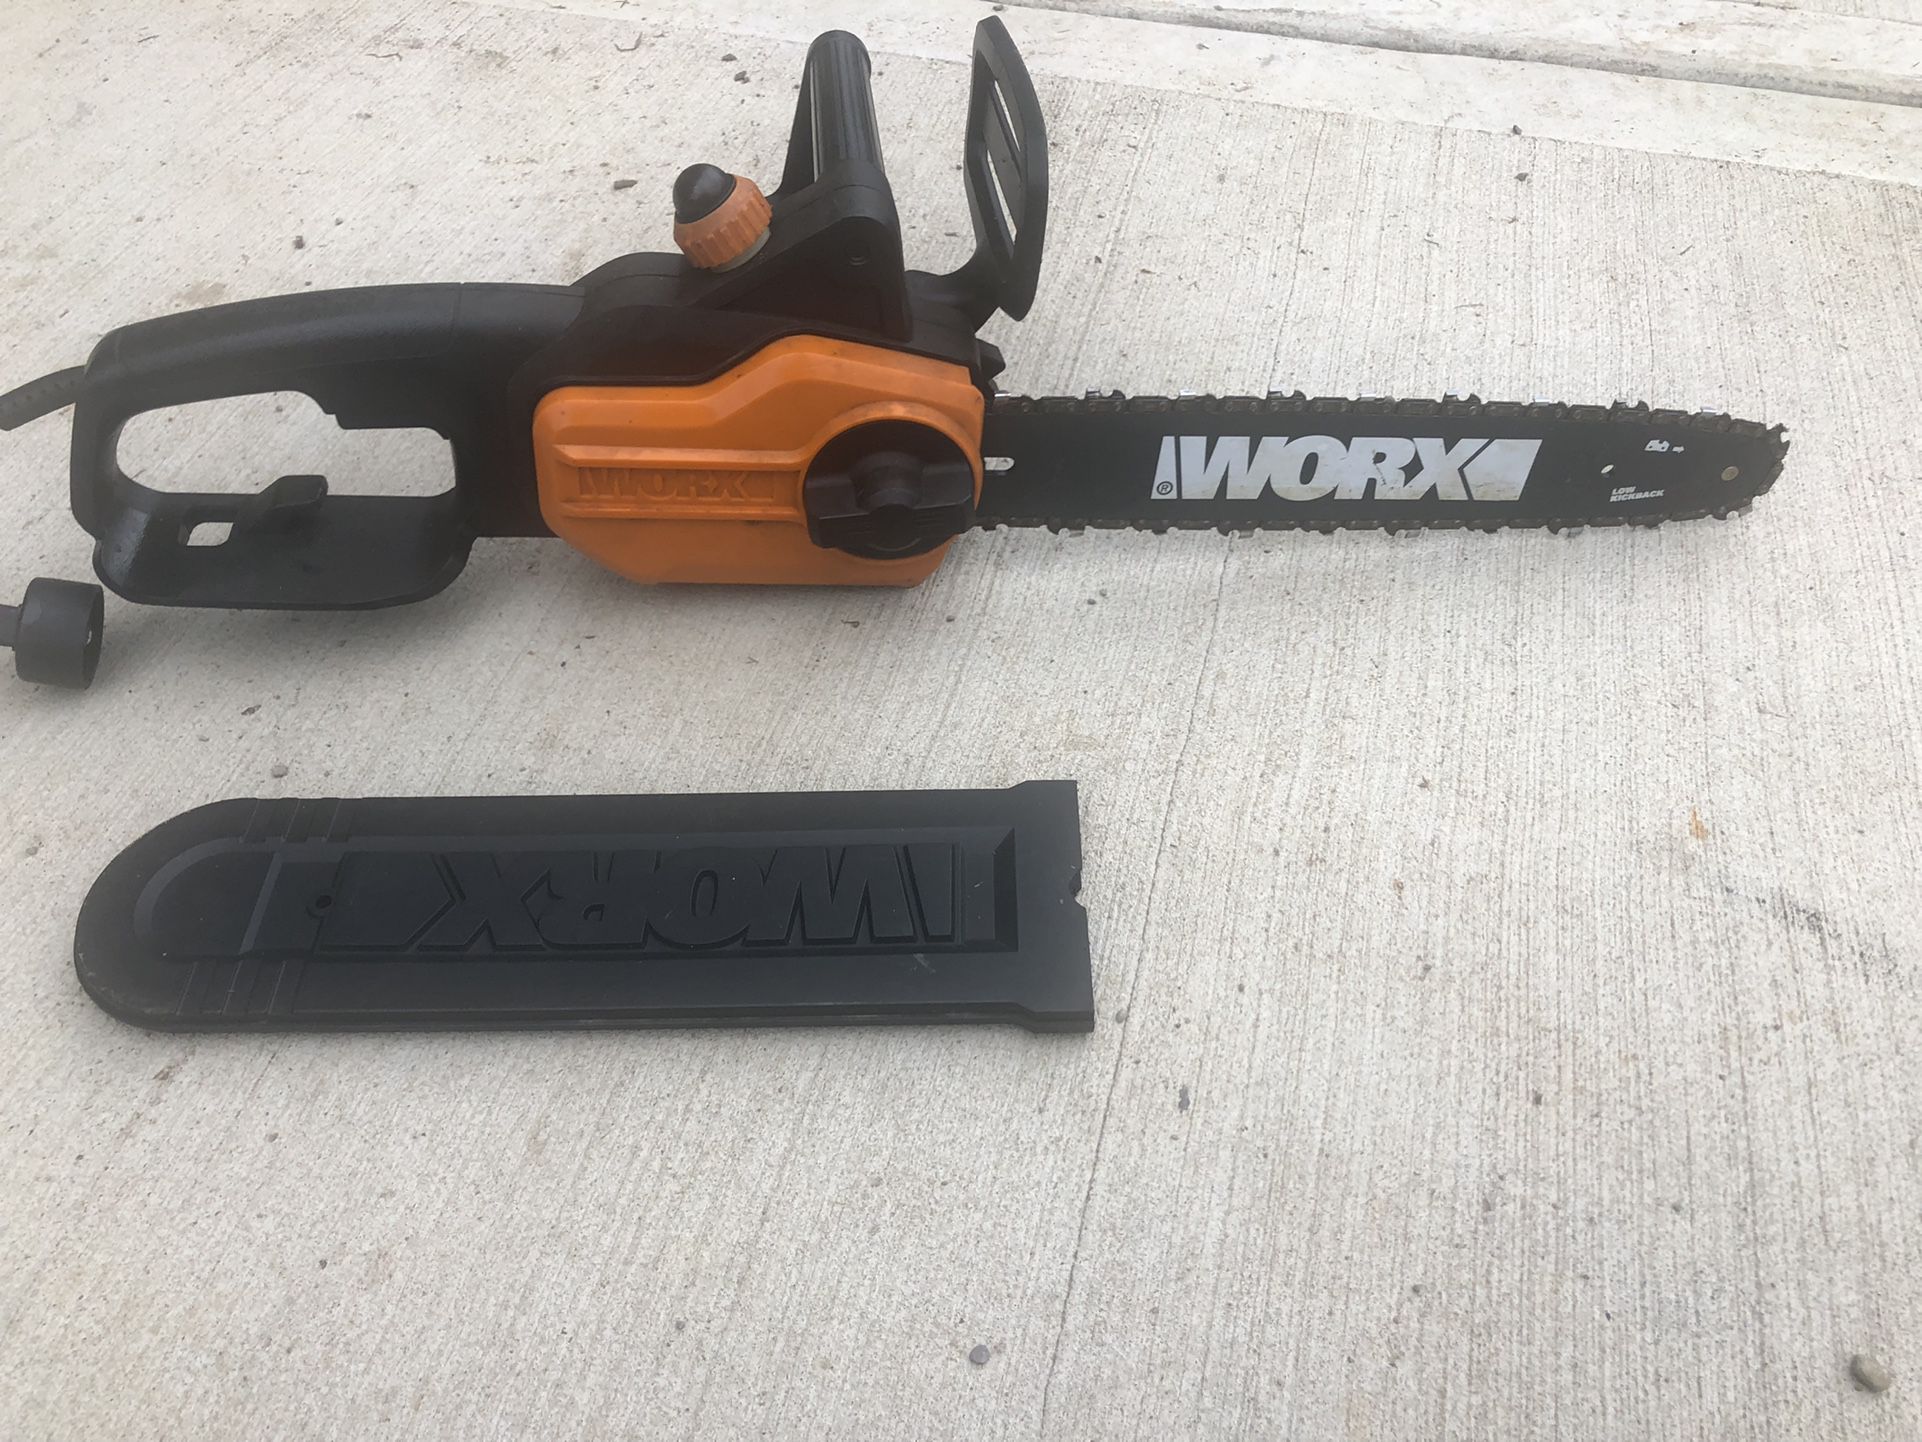 WORX WG305.1 Electric Corded Electric 14" Chainsaw 8 Amp $45 RETAILS OVER $86